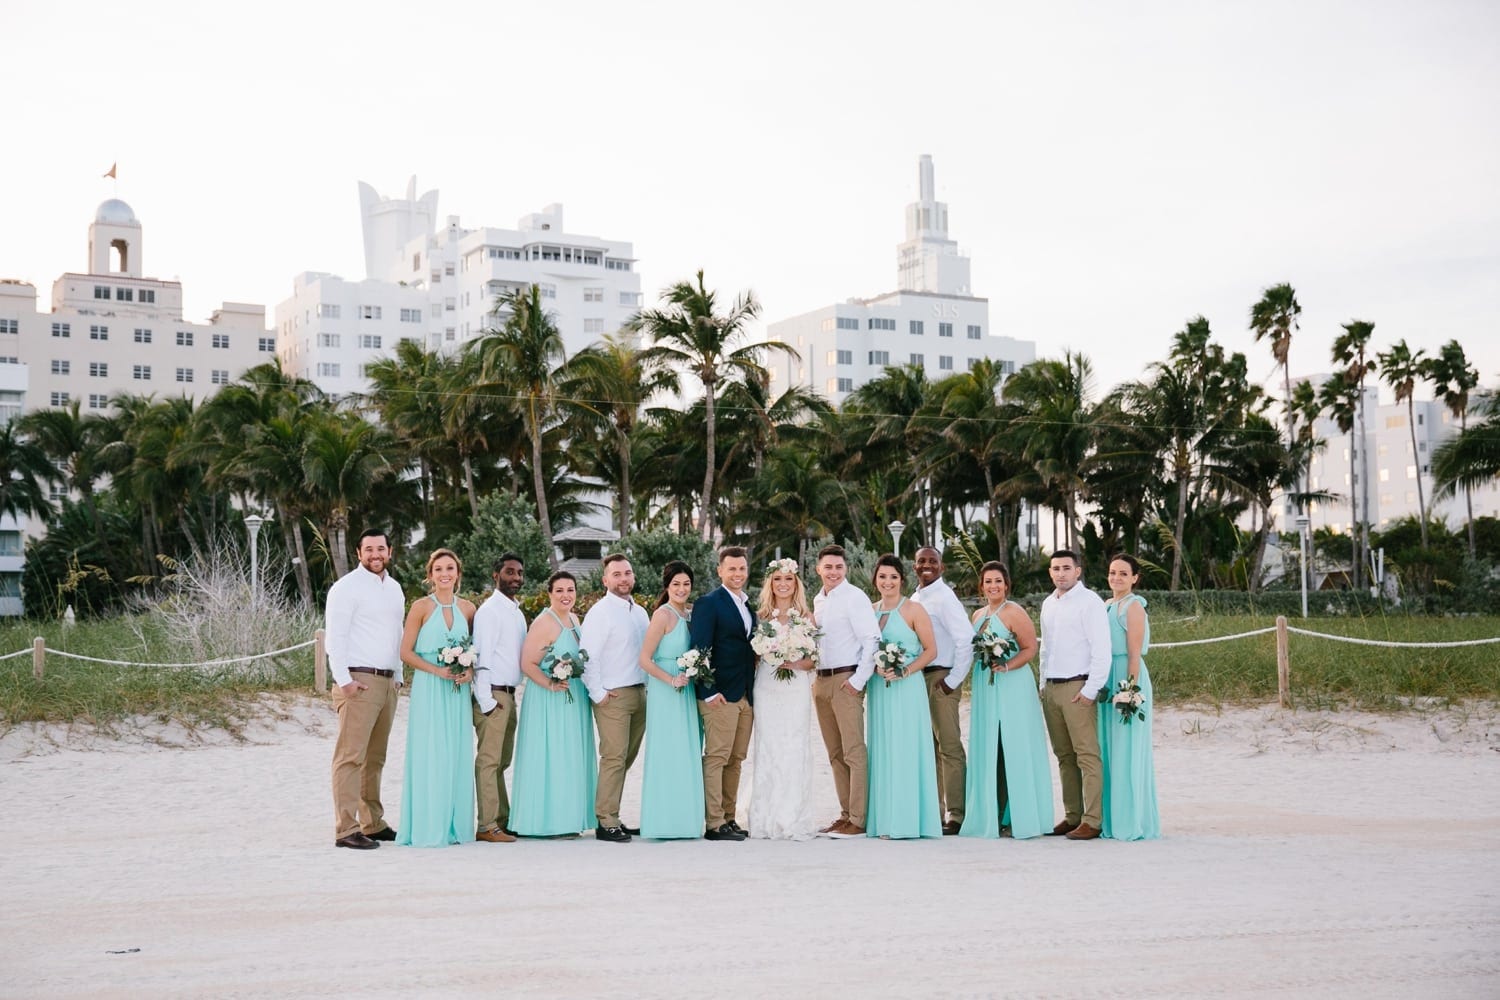 Wedding party Portrait. Turquoise bridesmaids dresses. Khaki pants and Blue Jacket Suit. Winter Beach Wedding at the National Hotel in South Beach Fl